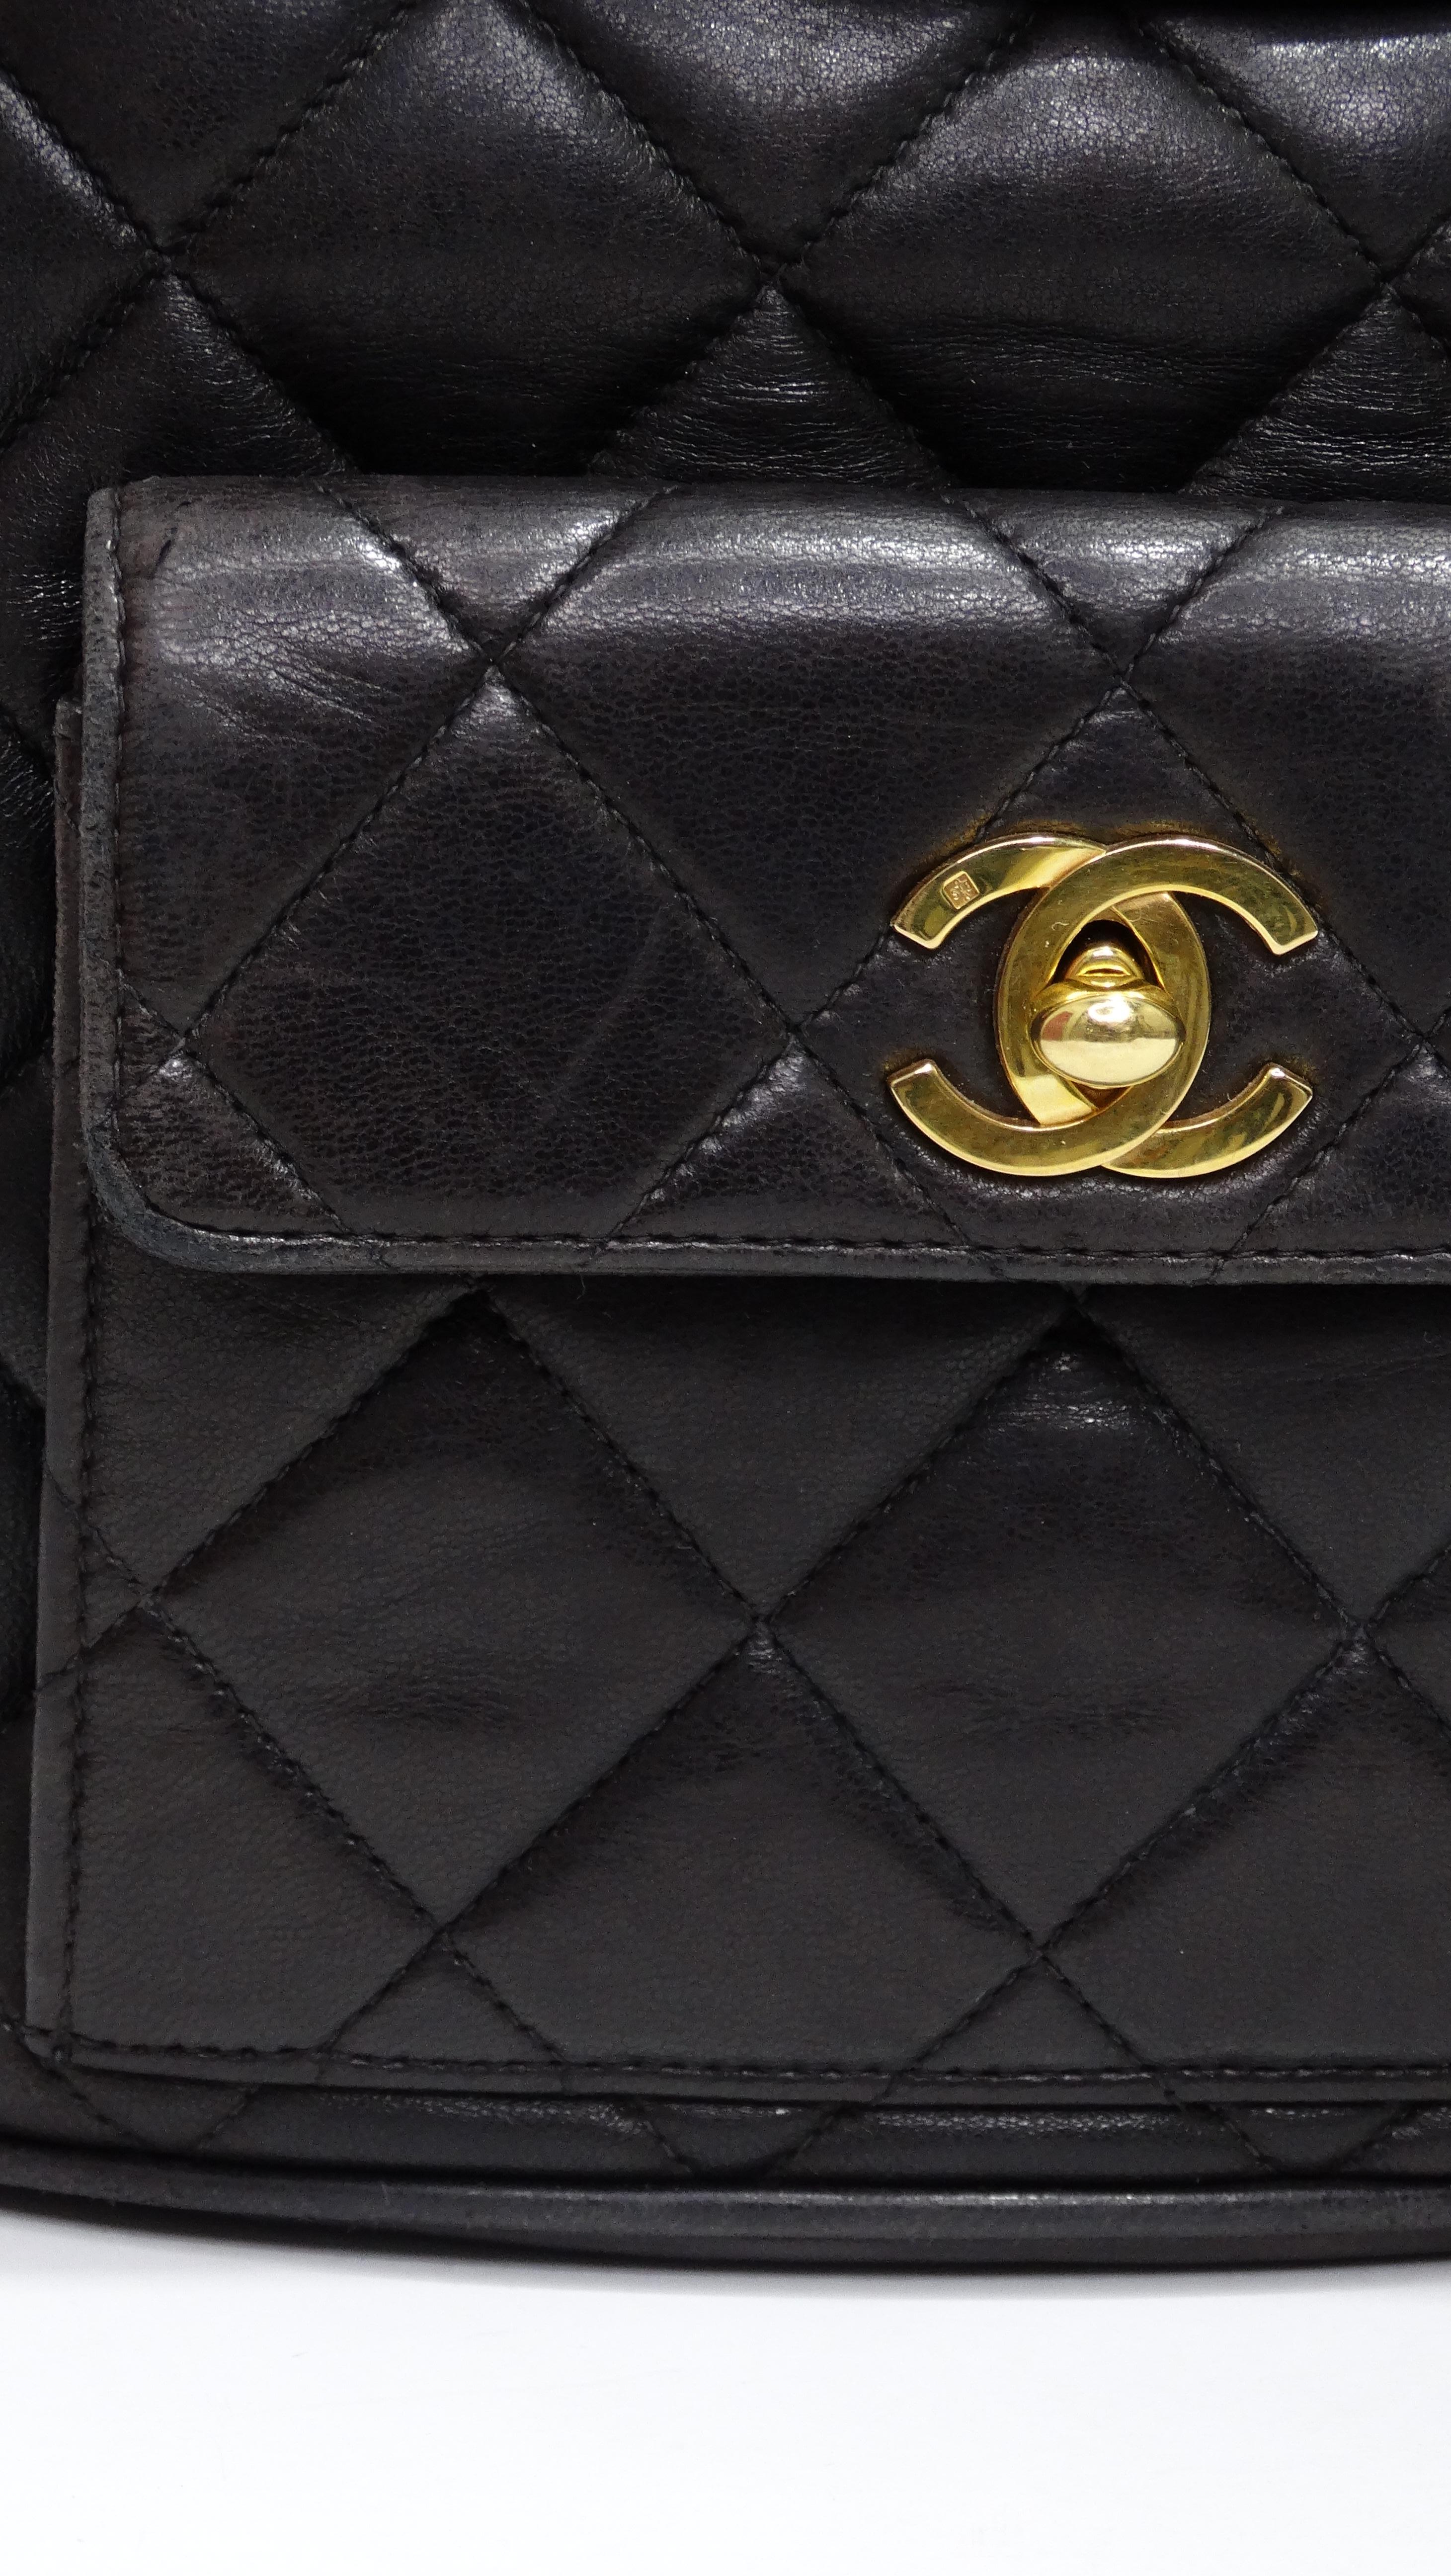 Get your hands on one of the most classic Chanel gems you can find! This is a VINTAGE Chanel backpack featured in a beautiful black lambskin quilted leather. From the 1990's, it is still in great condition and is ready for its next life! It is